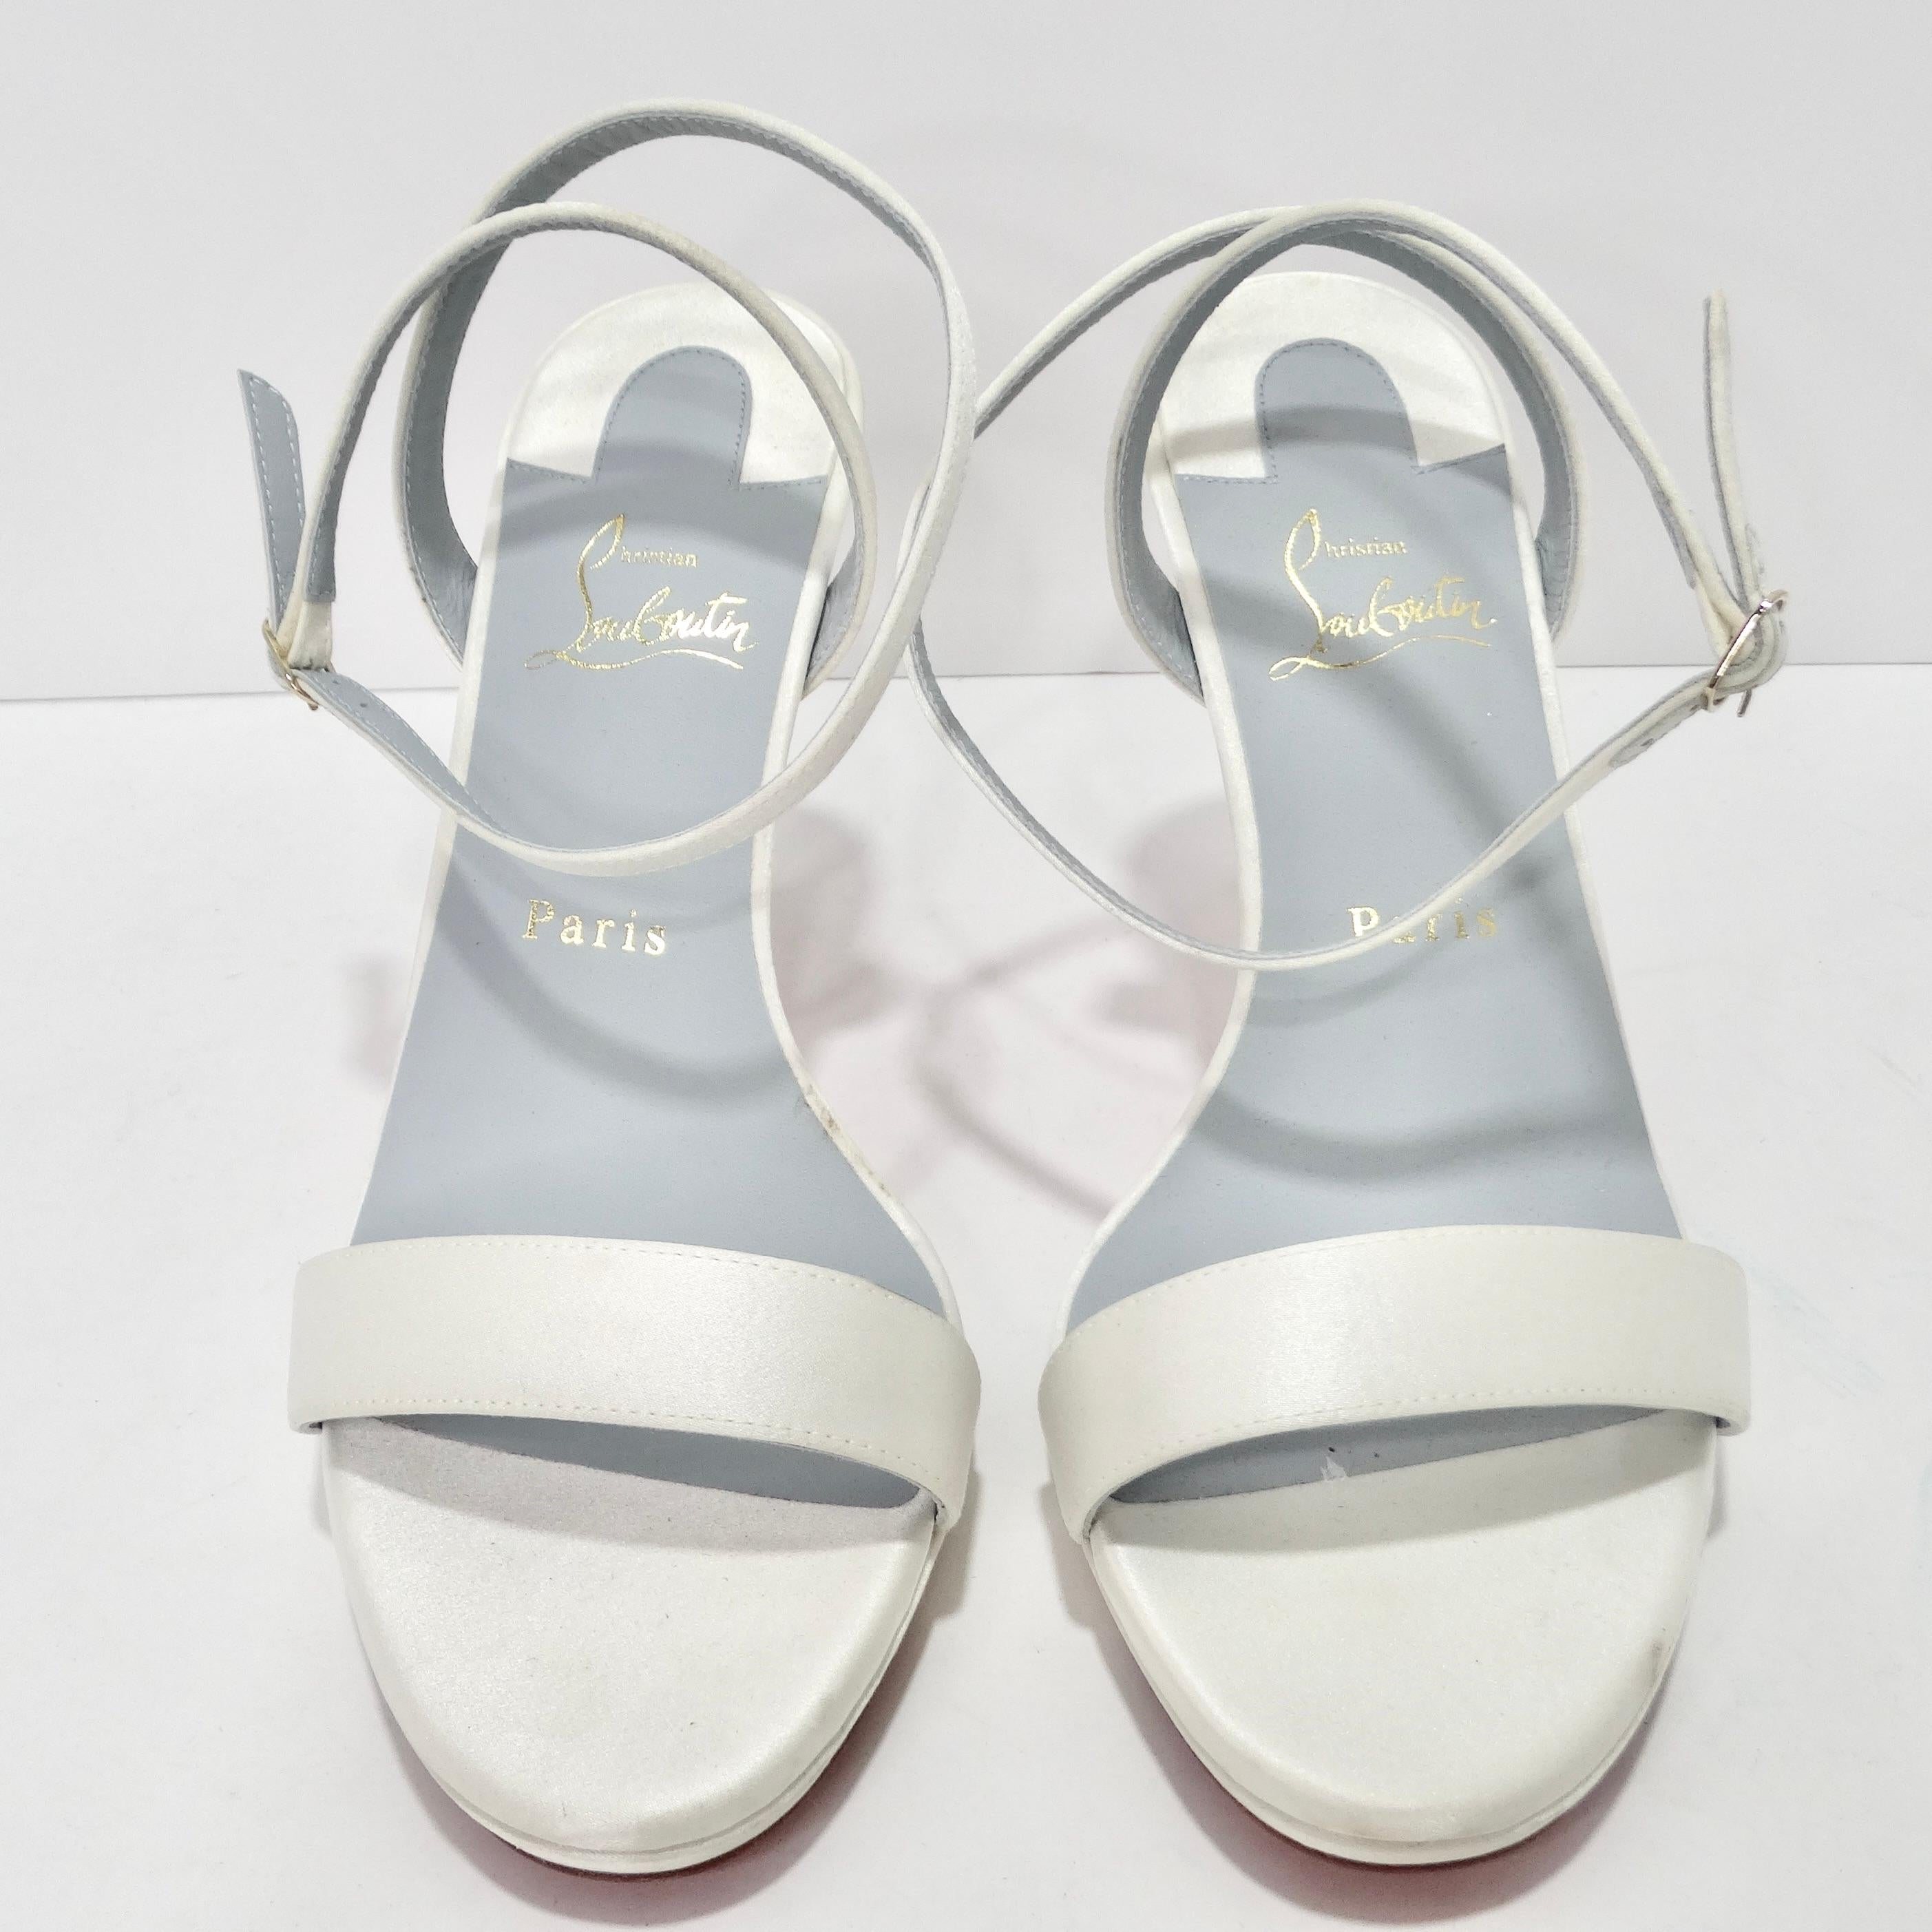 Elevate your footwear collection with the Christian Louboutin Loubi Queen Sandals, a classic and timeless strappy heel that's more than just a pair of shoes – it's a statement of enduring elegance and style. Crafted in a lustrous white satin, these